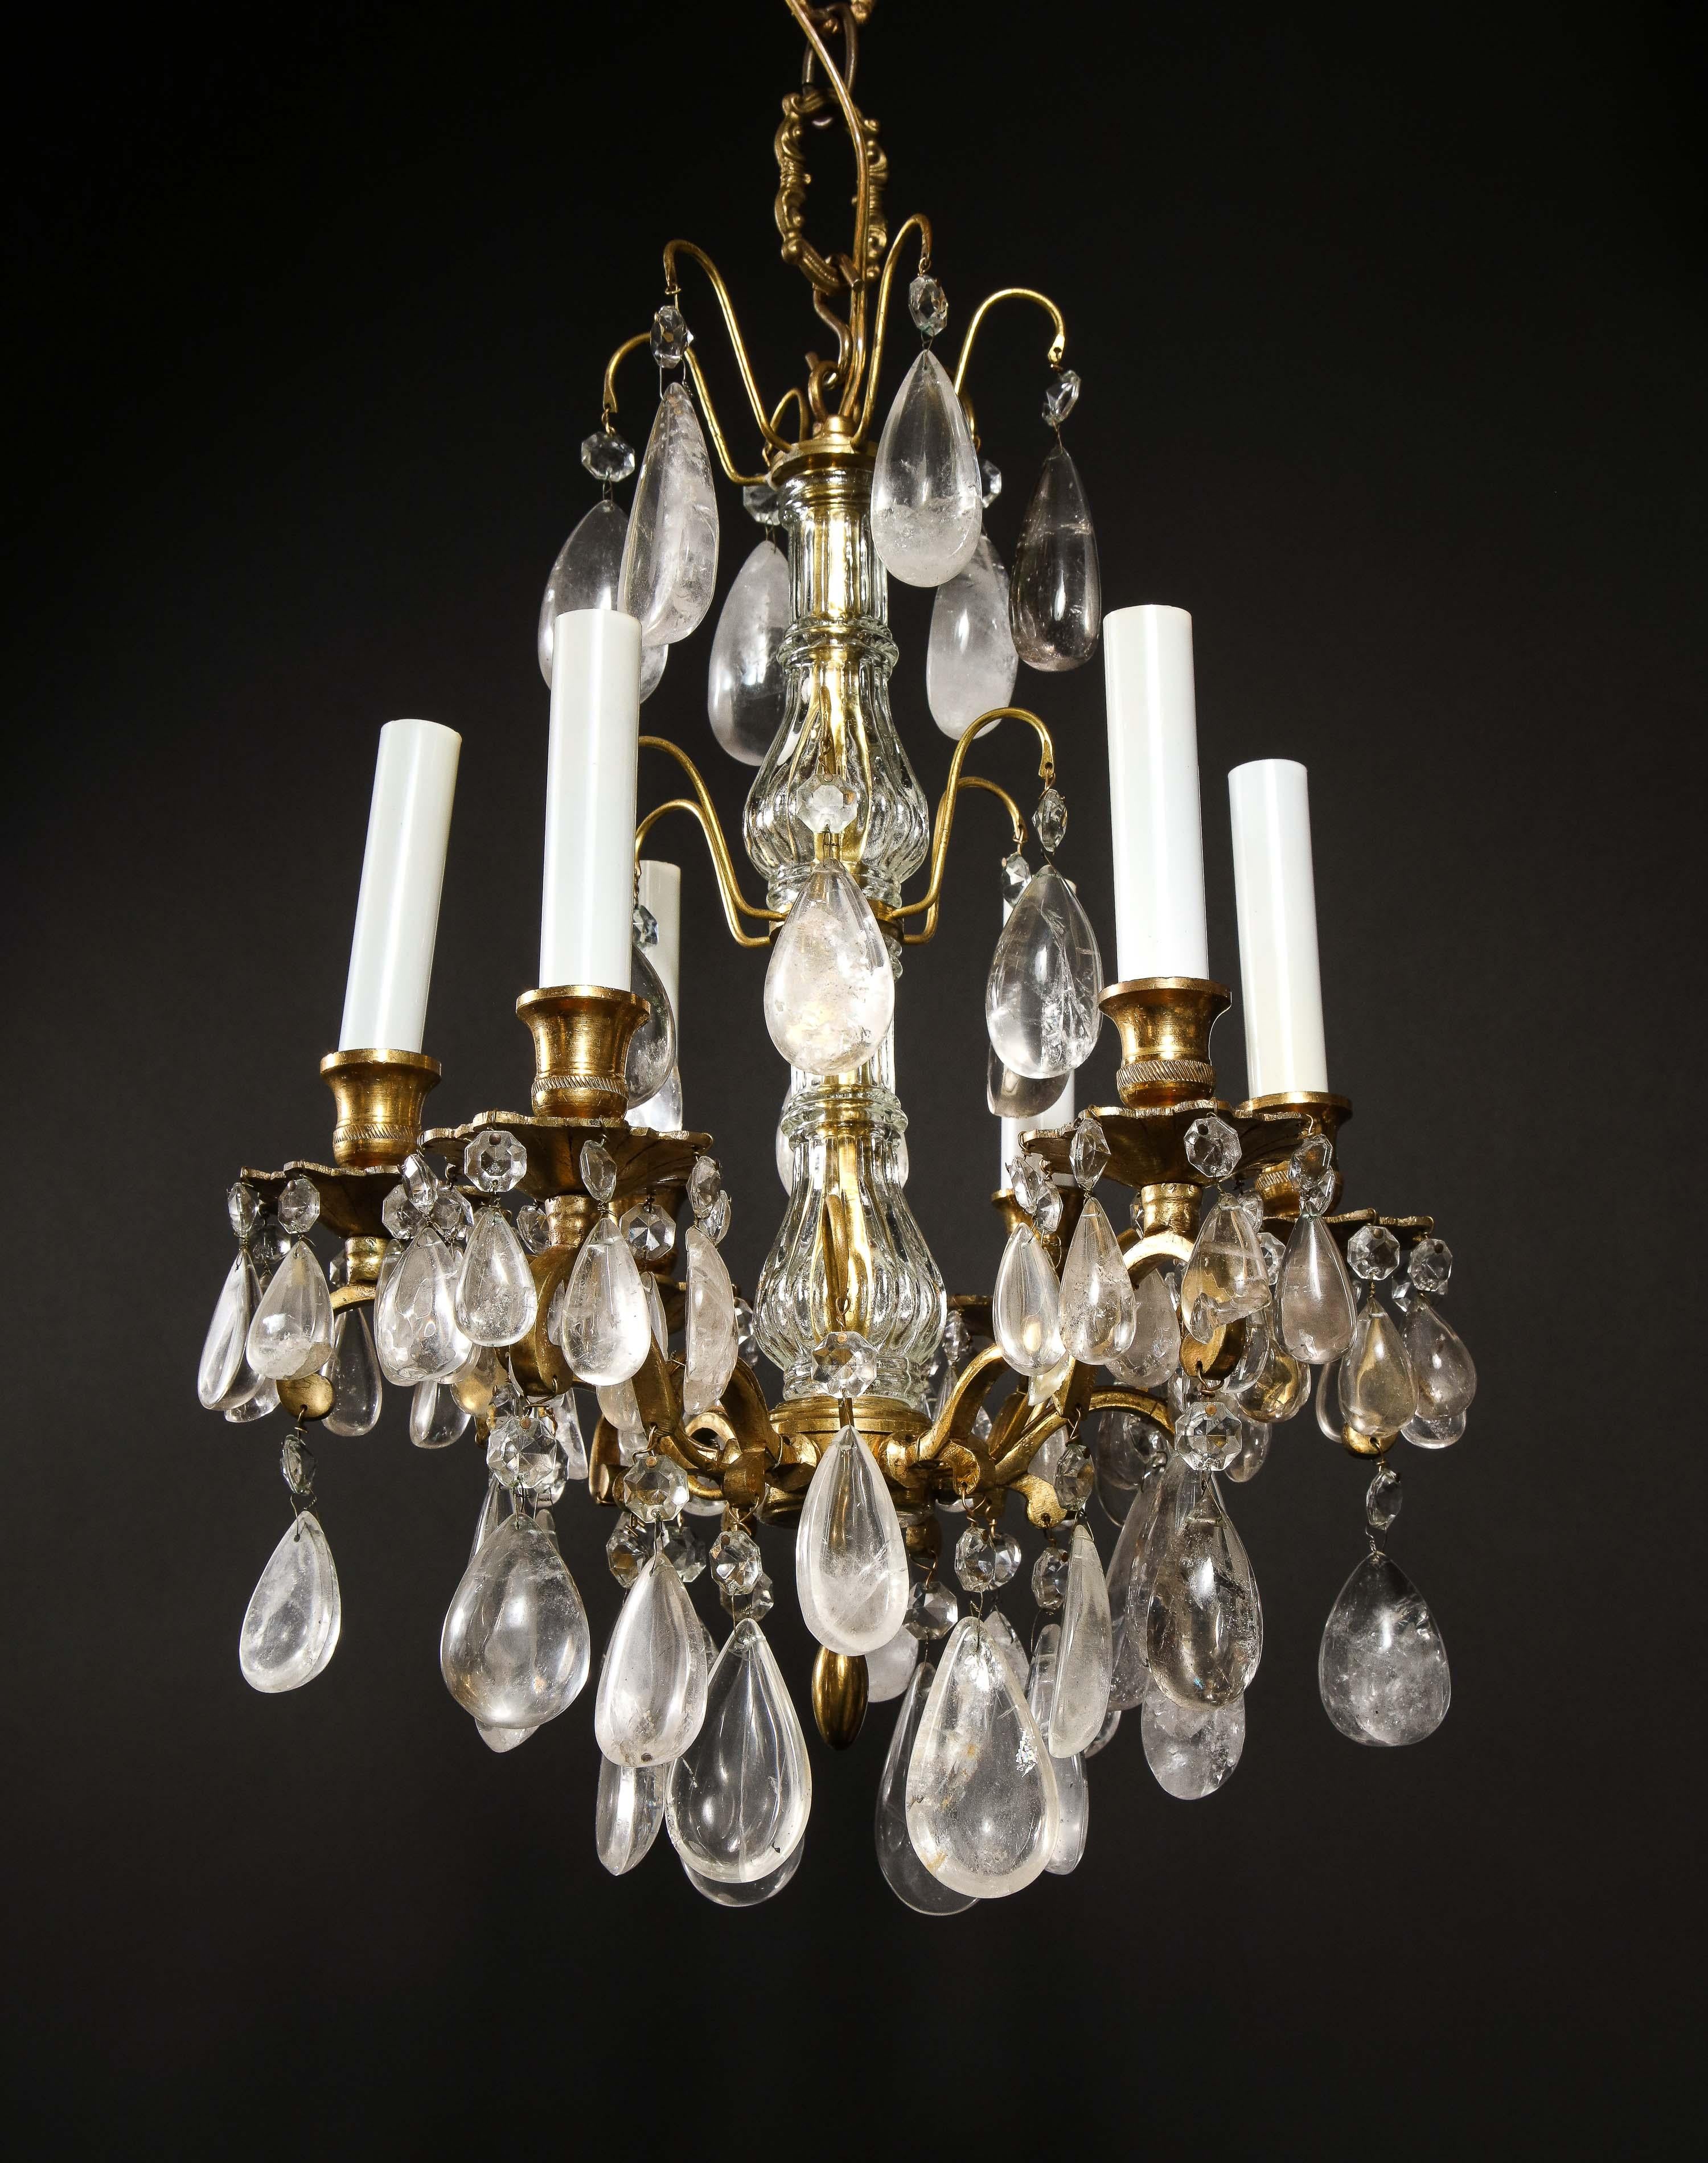 Hand-Crafted Pair of Fine Continental Louis XVI Style Rock Crystal Chandeliers